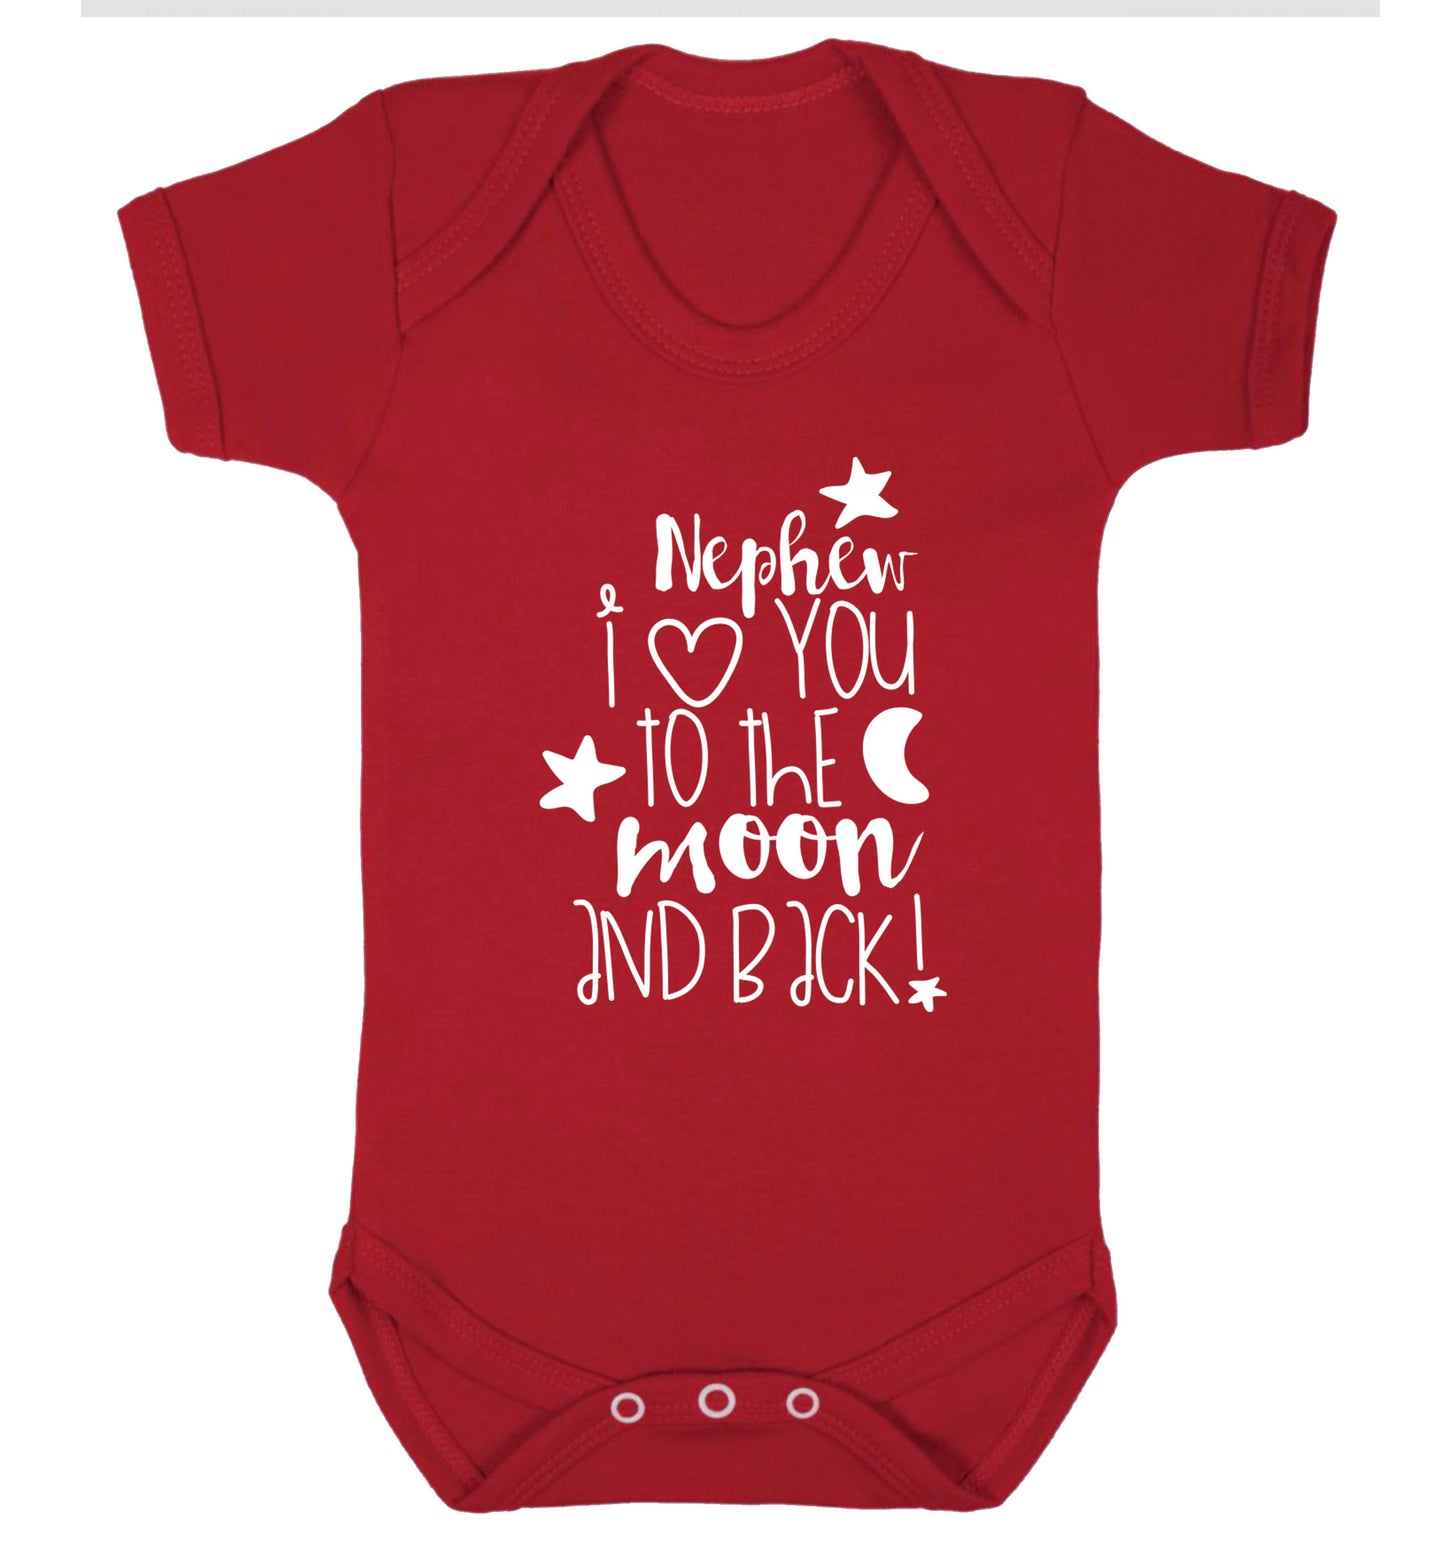 Nephew I love you to the moon and back Baby Vest red 18-24 months